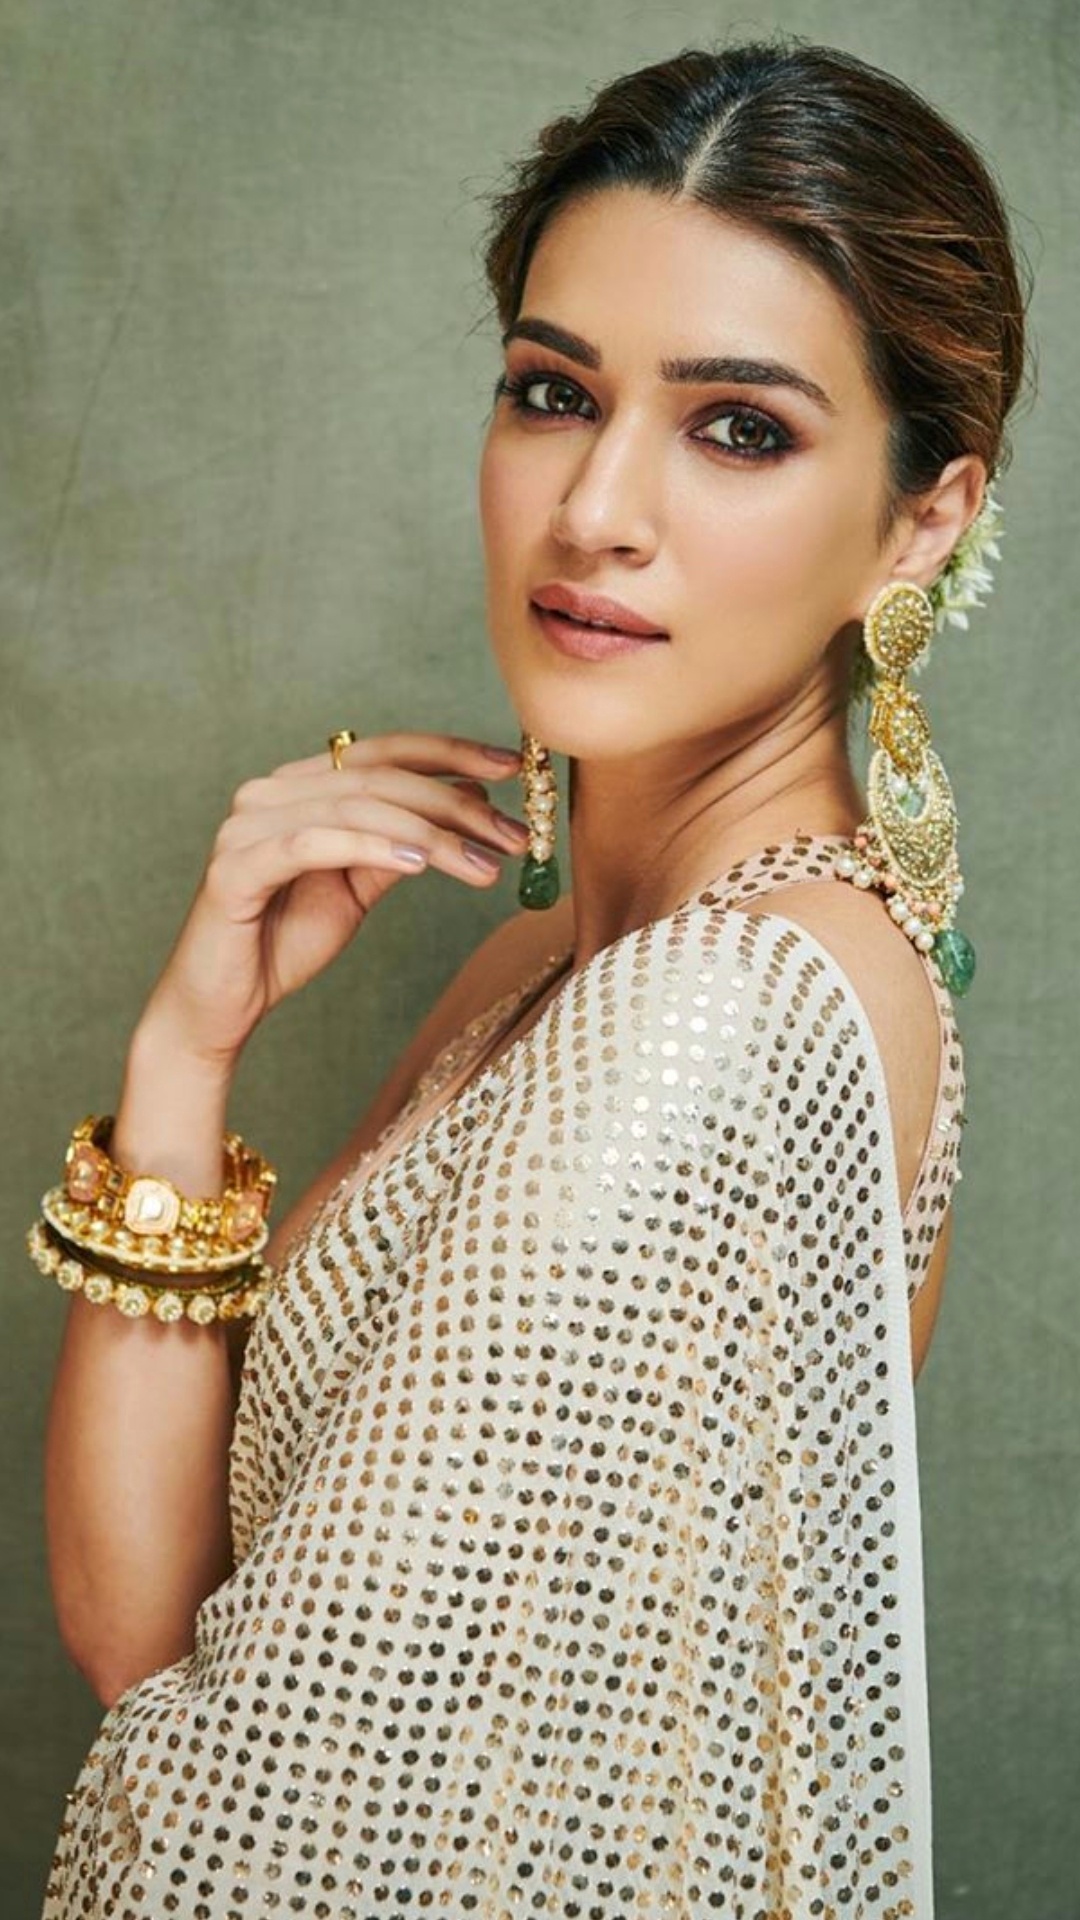 Kriti Sanon Looking Drop Dead Gorgeous in Saree In A Traditional Manner